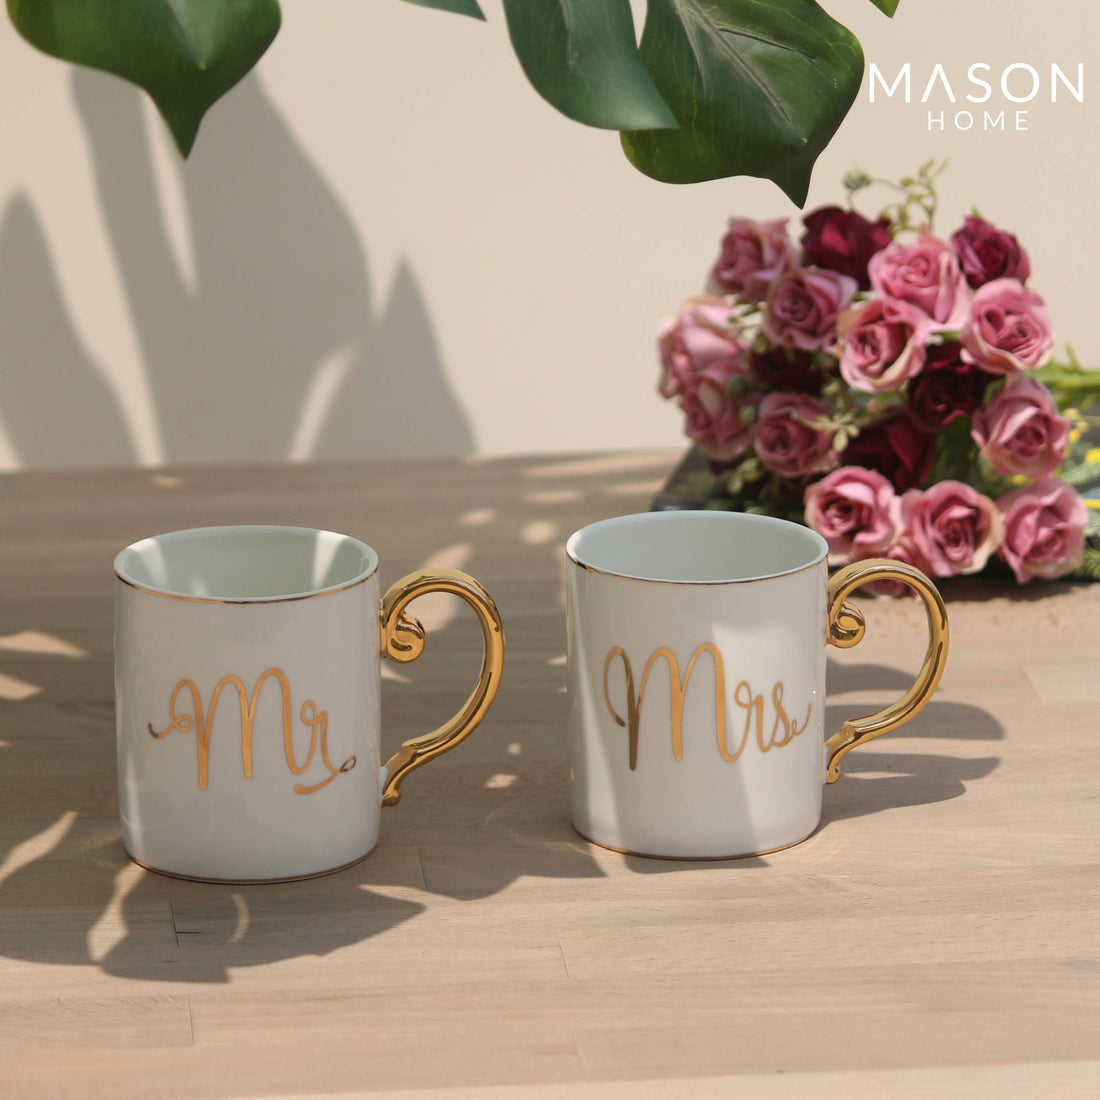 THE MR &amp; MRS CUP - Mason Home by Amarsons - Lifestyle &amp; Decor